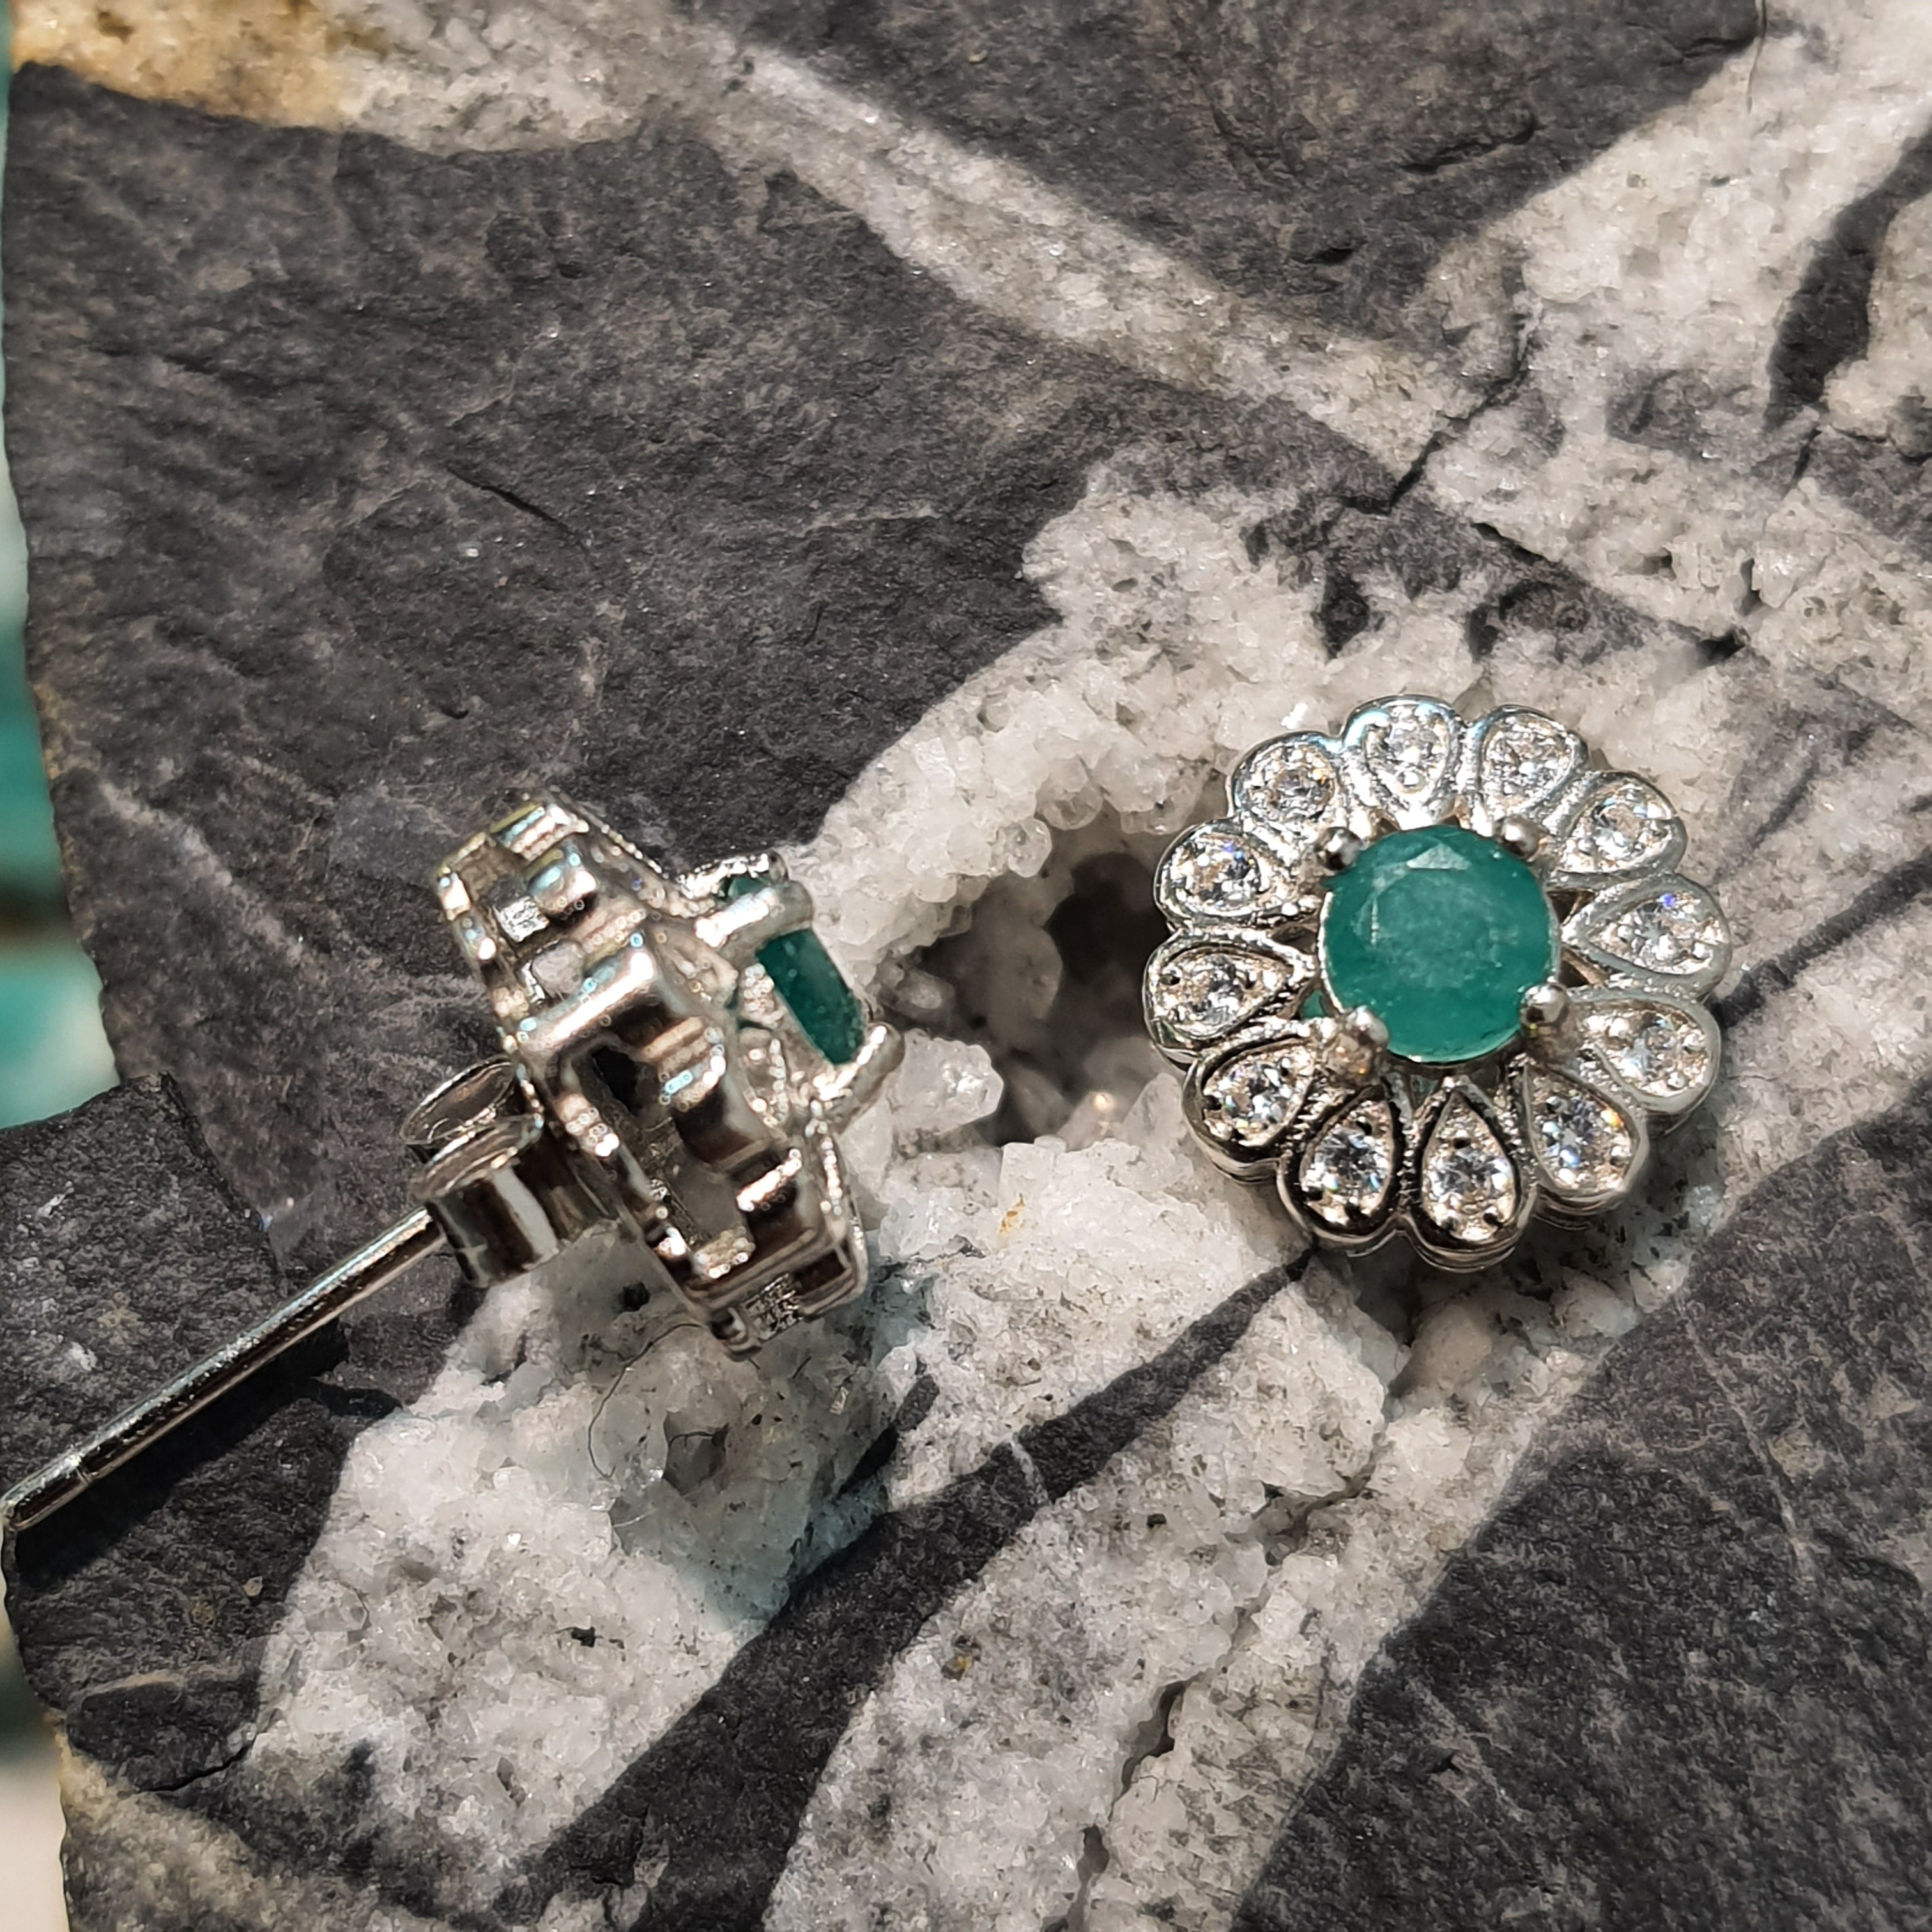 Floral Sterling Silver Earrings with Round Central Emerald of Superior Color